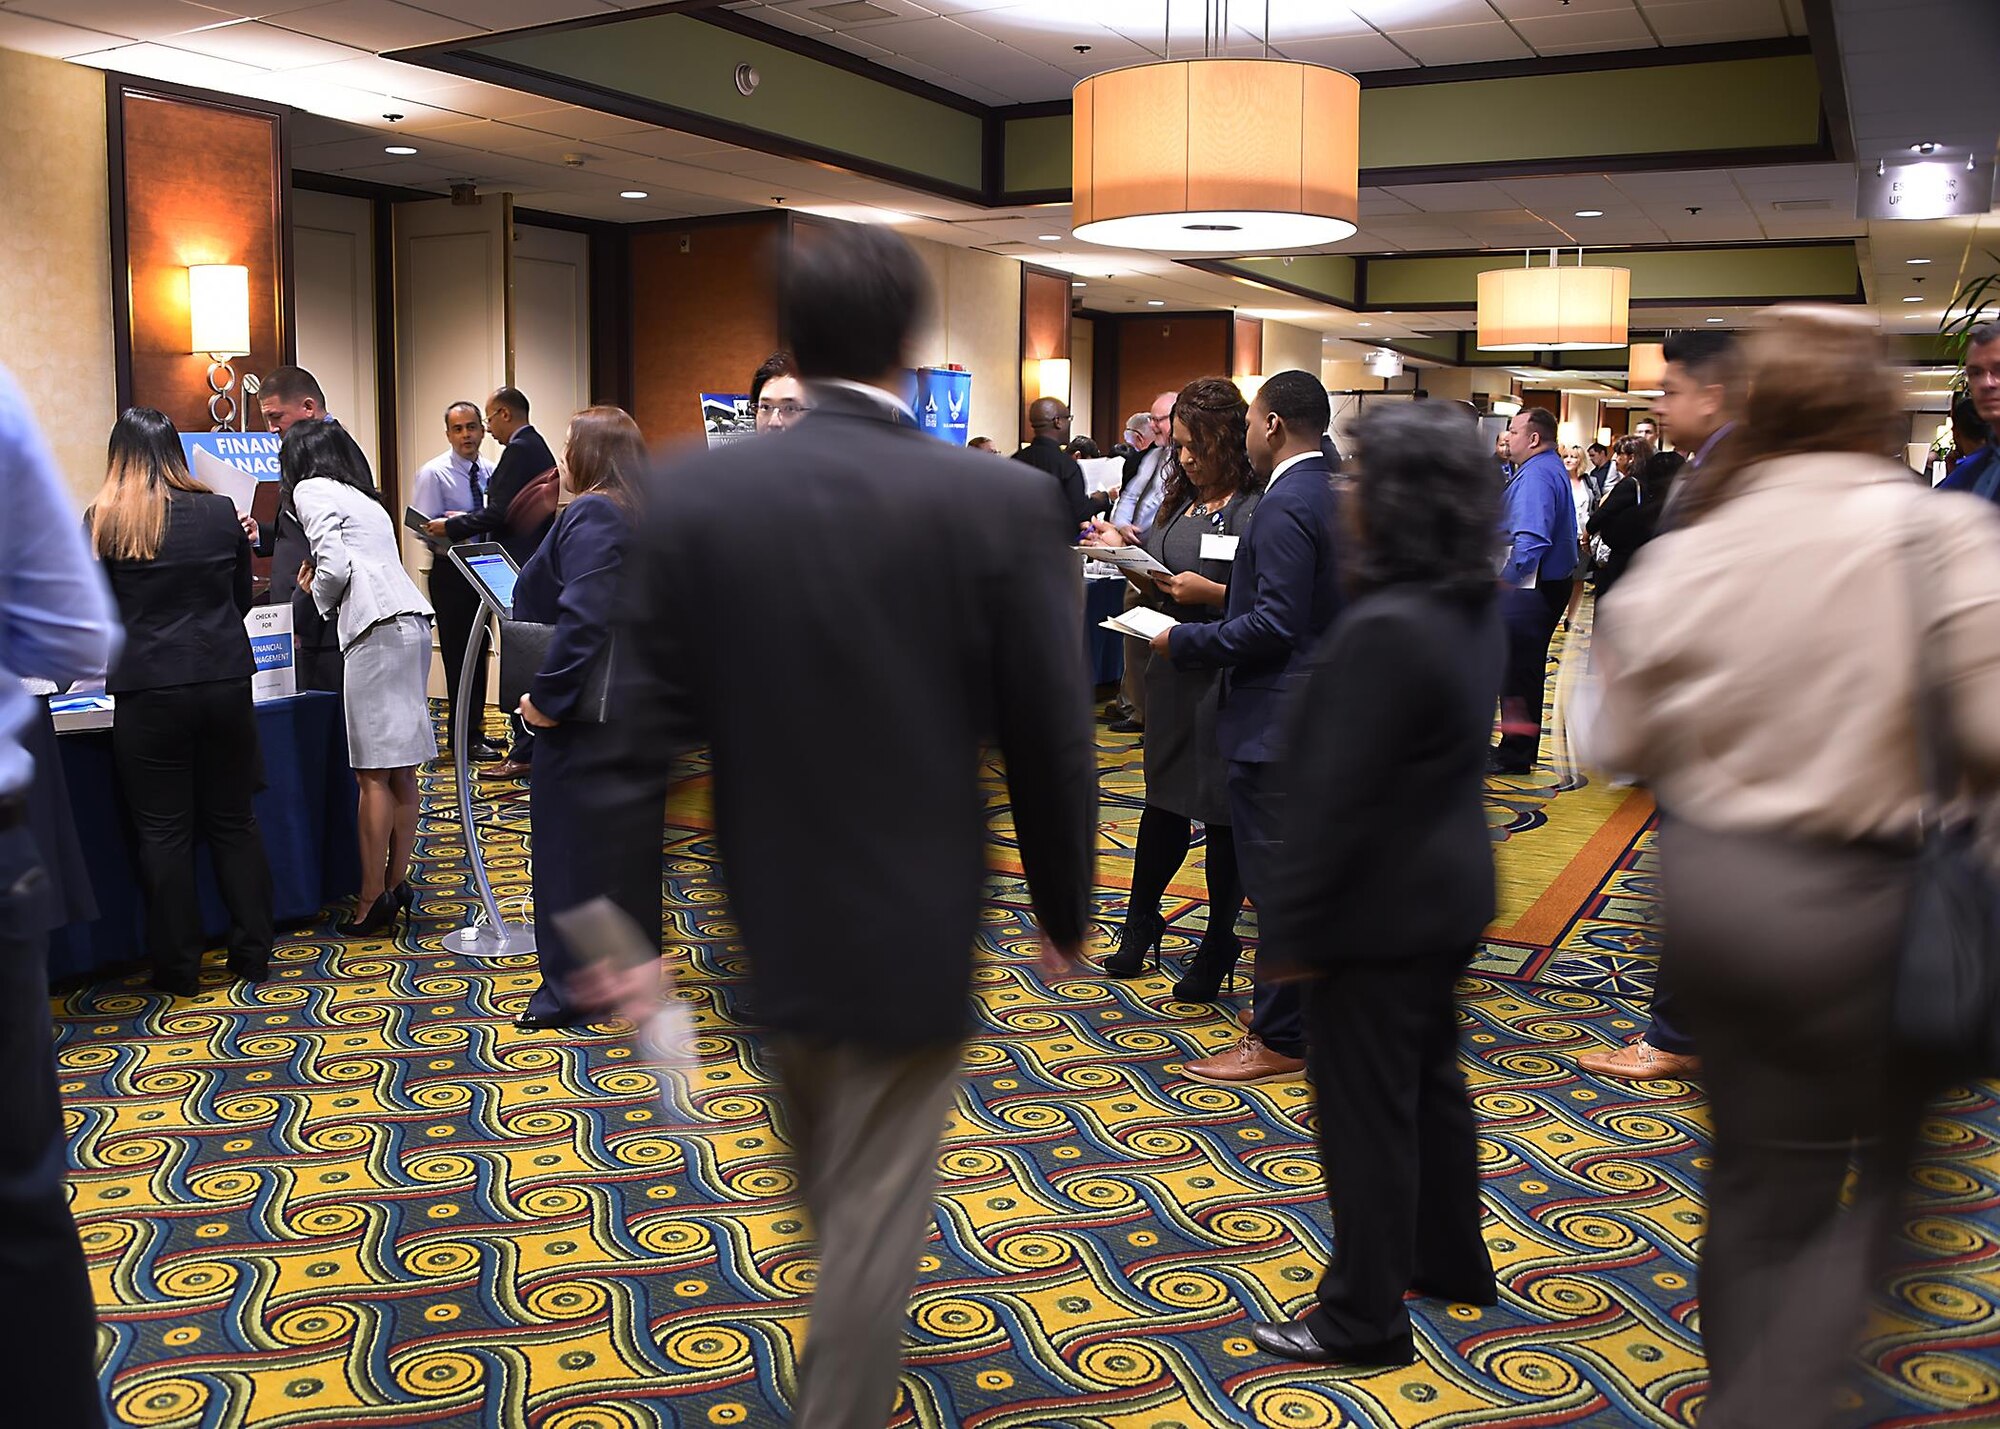 The hallways of the Los Angeles Airport Marriott were a flurry of activity as personnel from the Space and Missile Systems Center and Air Force Personnel Center hosted an Air Force Civilian Service Job Fair Nov. 16. More than 1,000 pre-registered applicants, plus another 500 in attendance, made the largest one-day hiring event ever hosted by the Air Force a success.